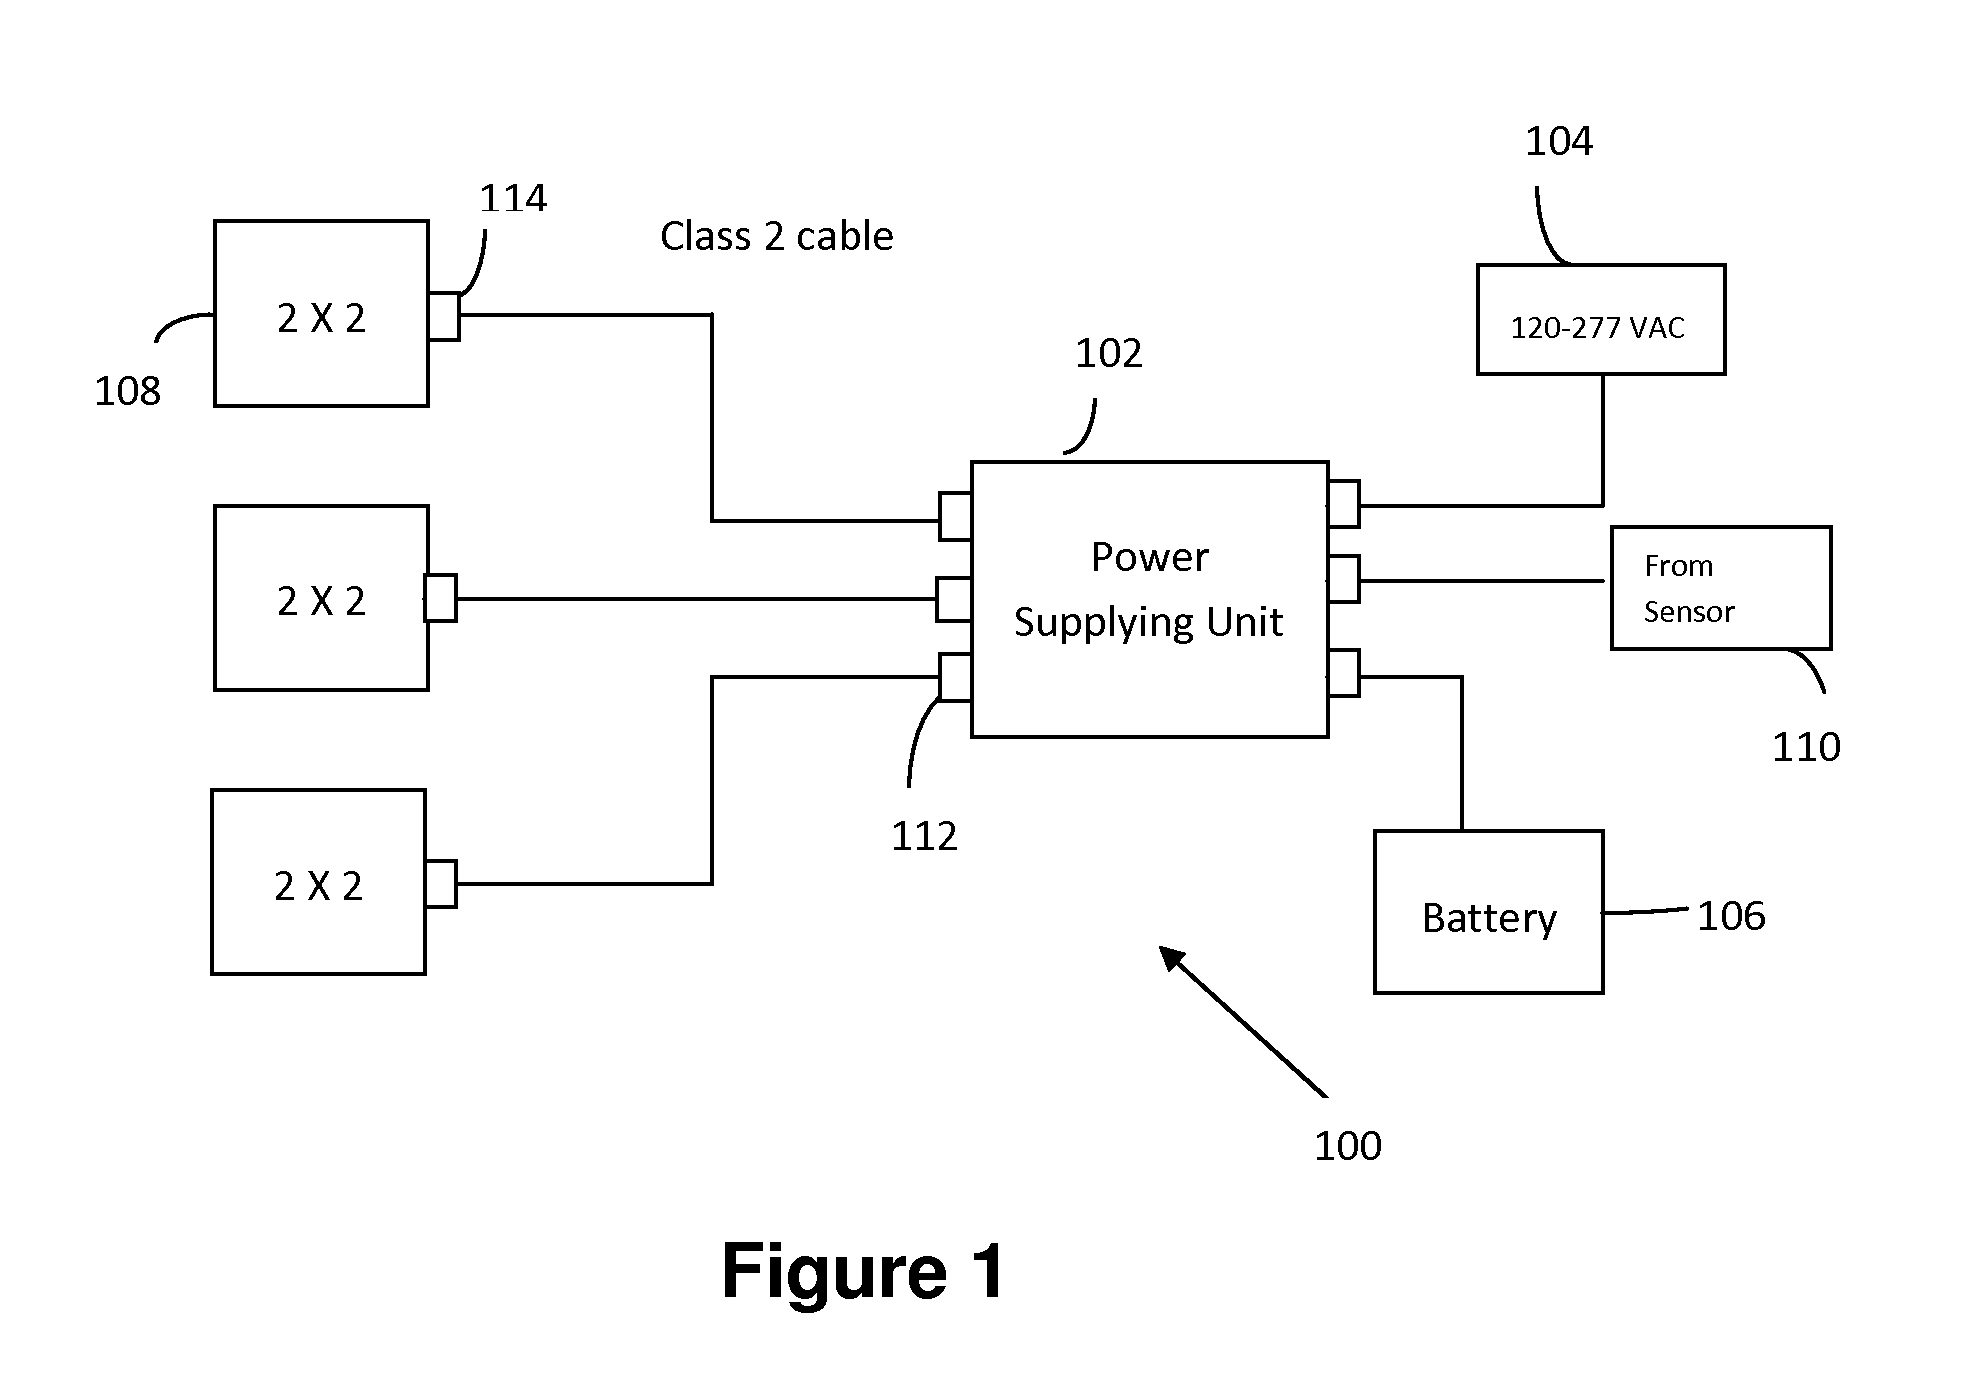 Hybrid power architecture for controlling a lighting system